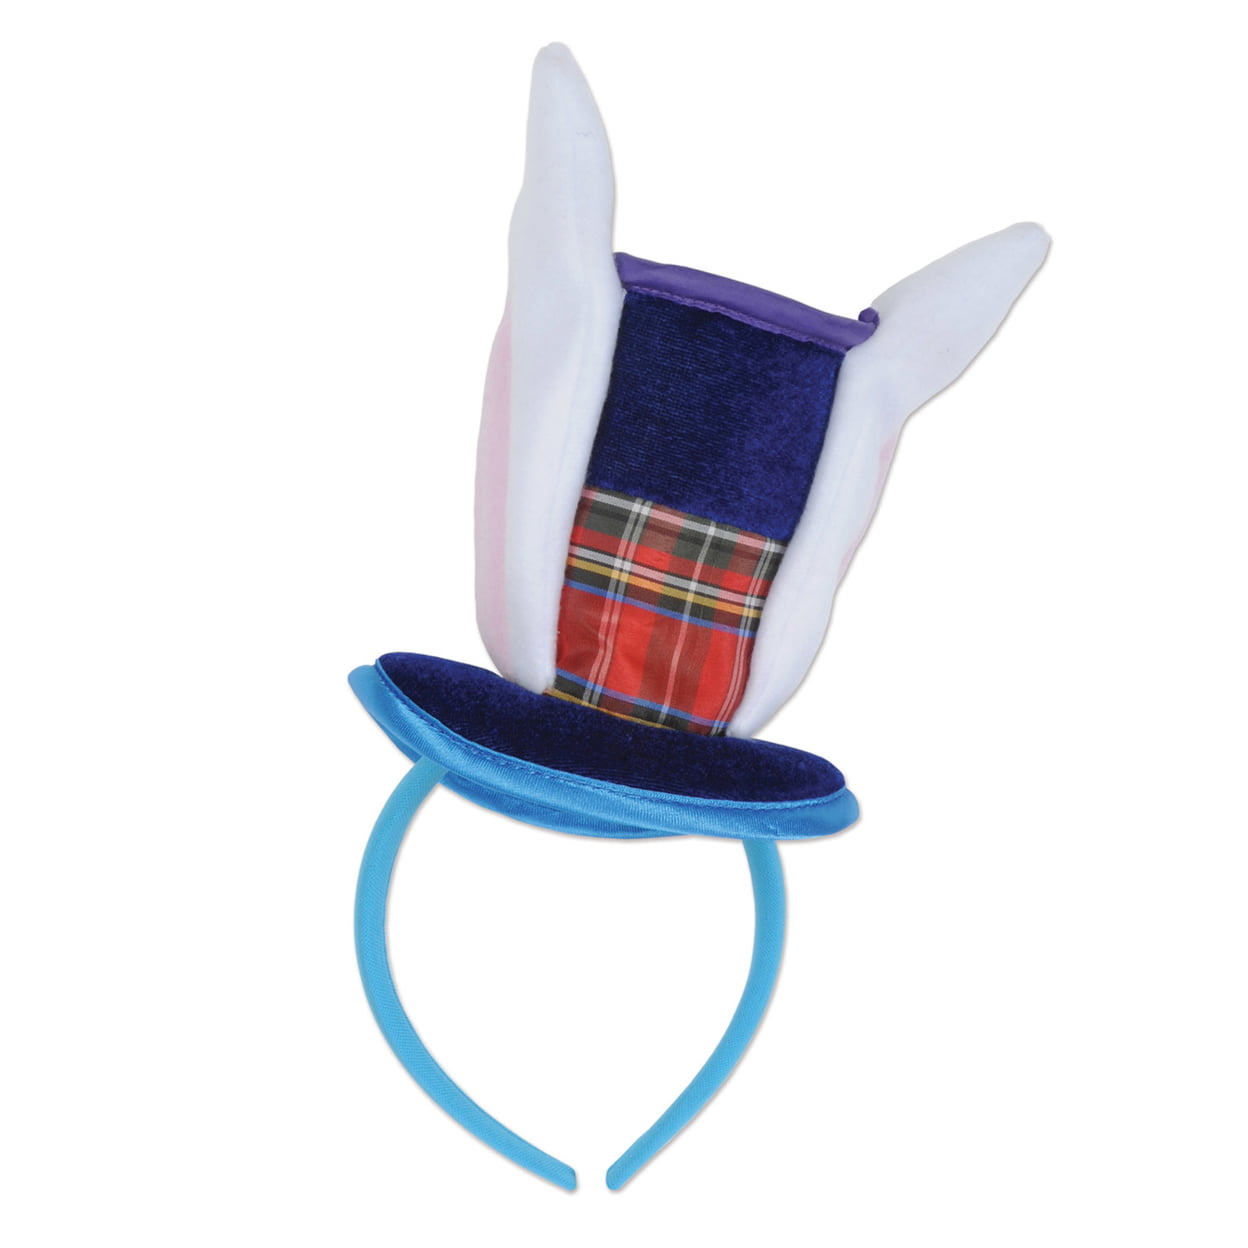 BEISTLE CO Beistle 60019 Bunny Top Hat & Ears Headband, Blue & White - Pack of 12